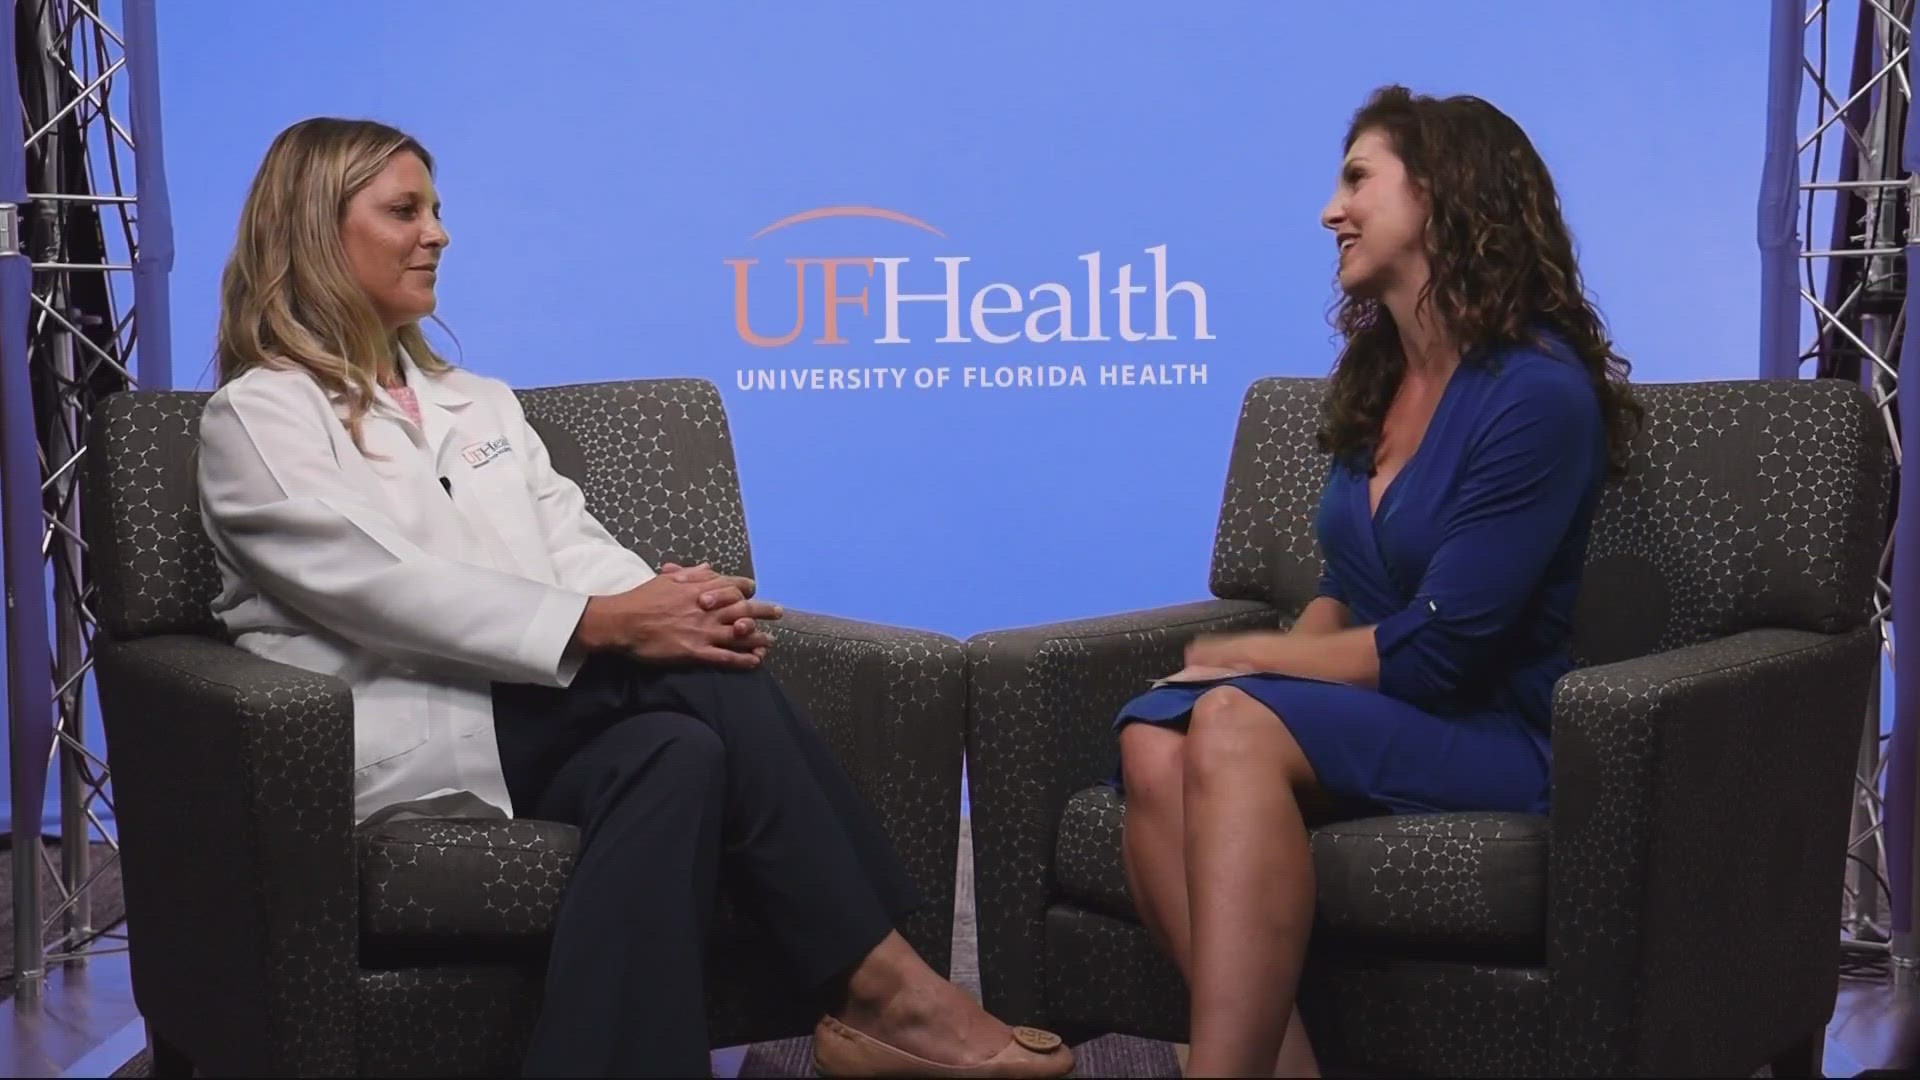 The UF Health Orthopedic Adult Reconstruction
Program continues to grow in patient volume
and geographic availability. The newest facility is called UF Health East.